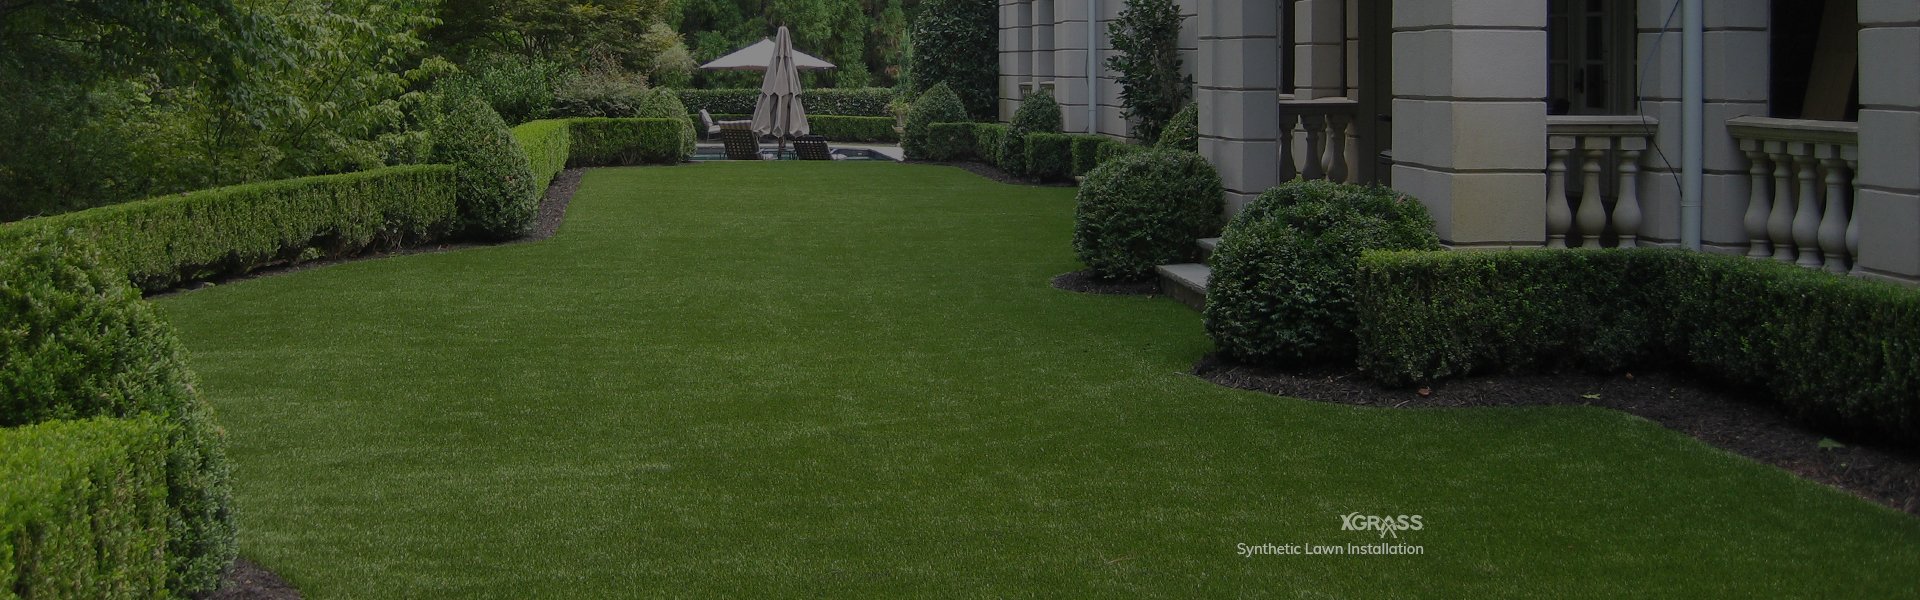 Low-Maintenance Synthetic Turf Systems